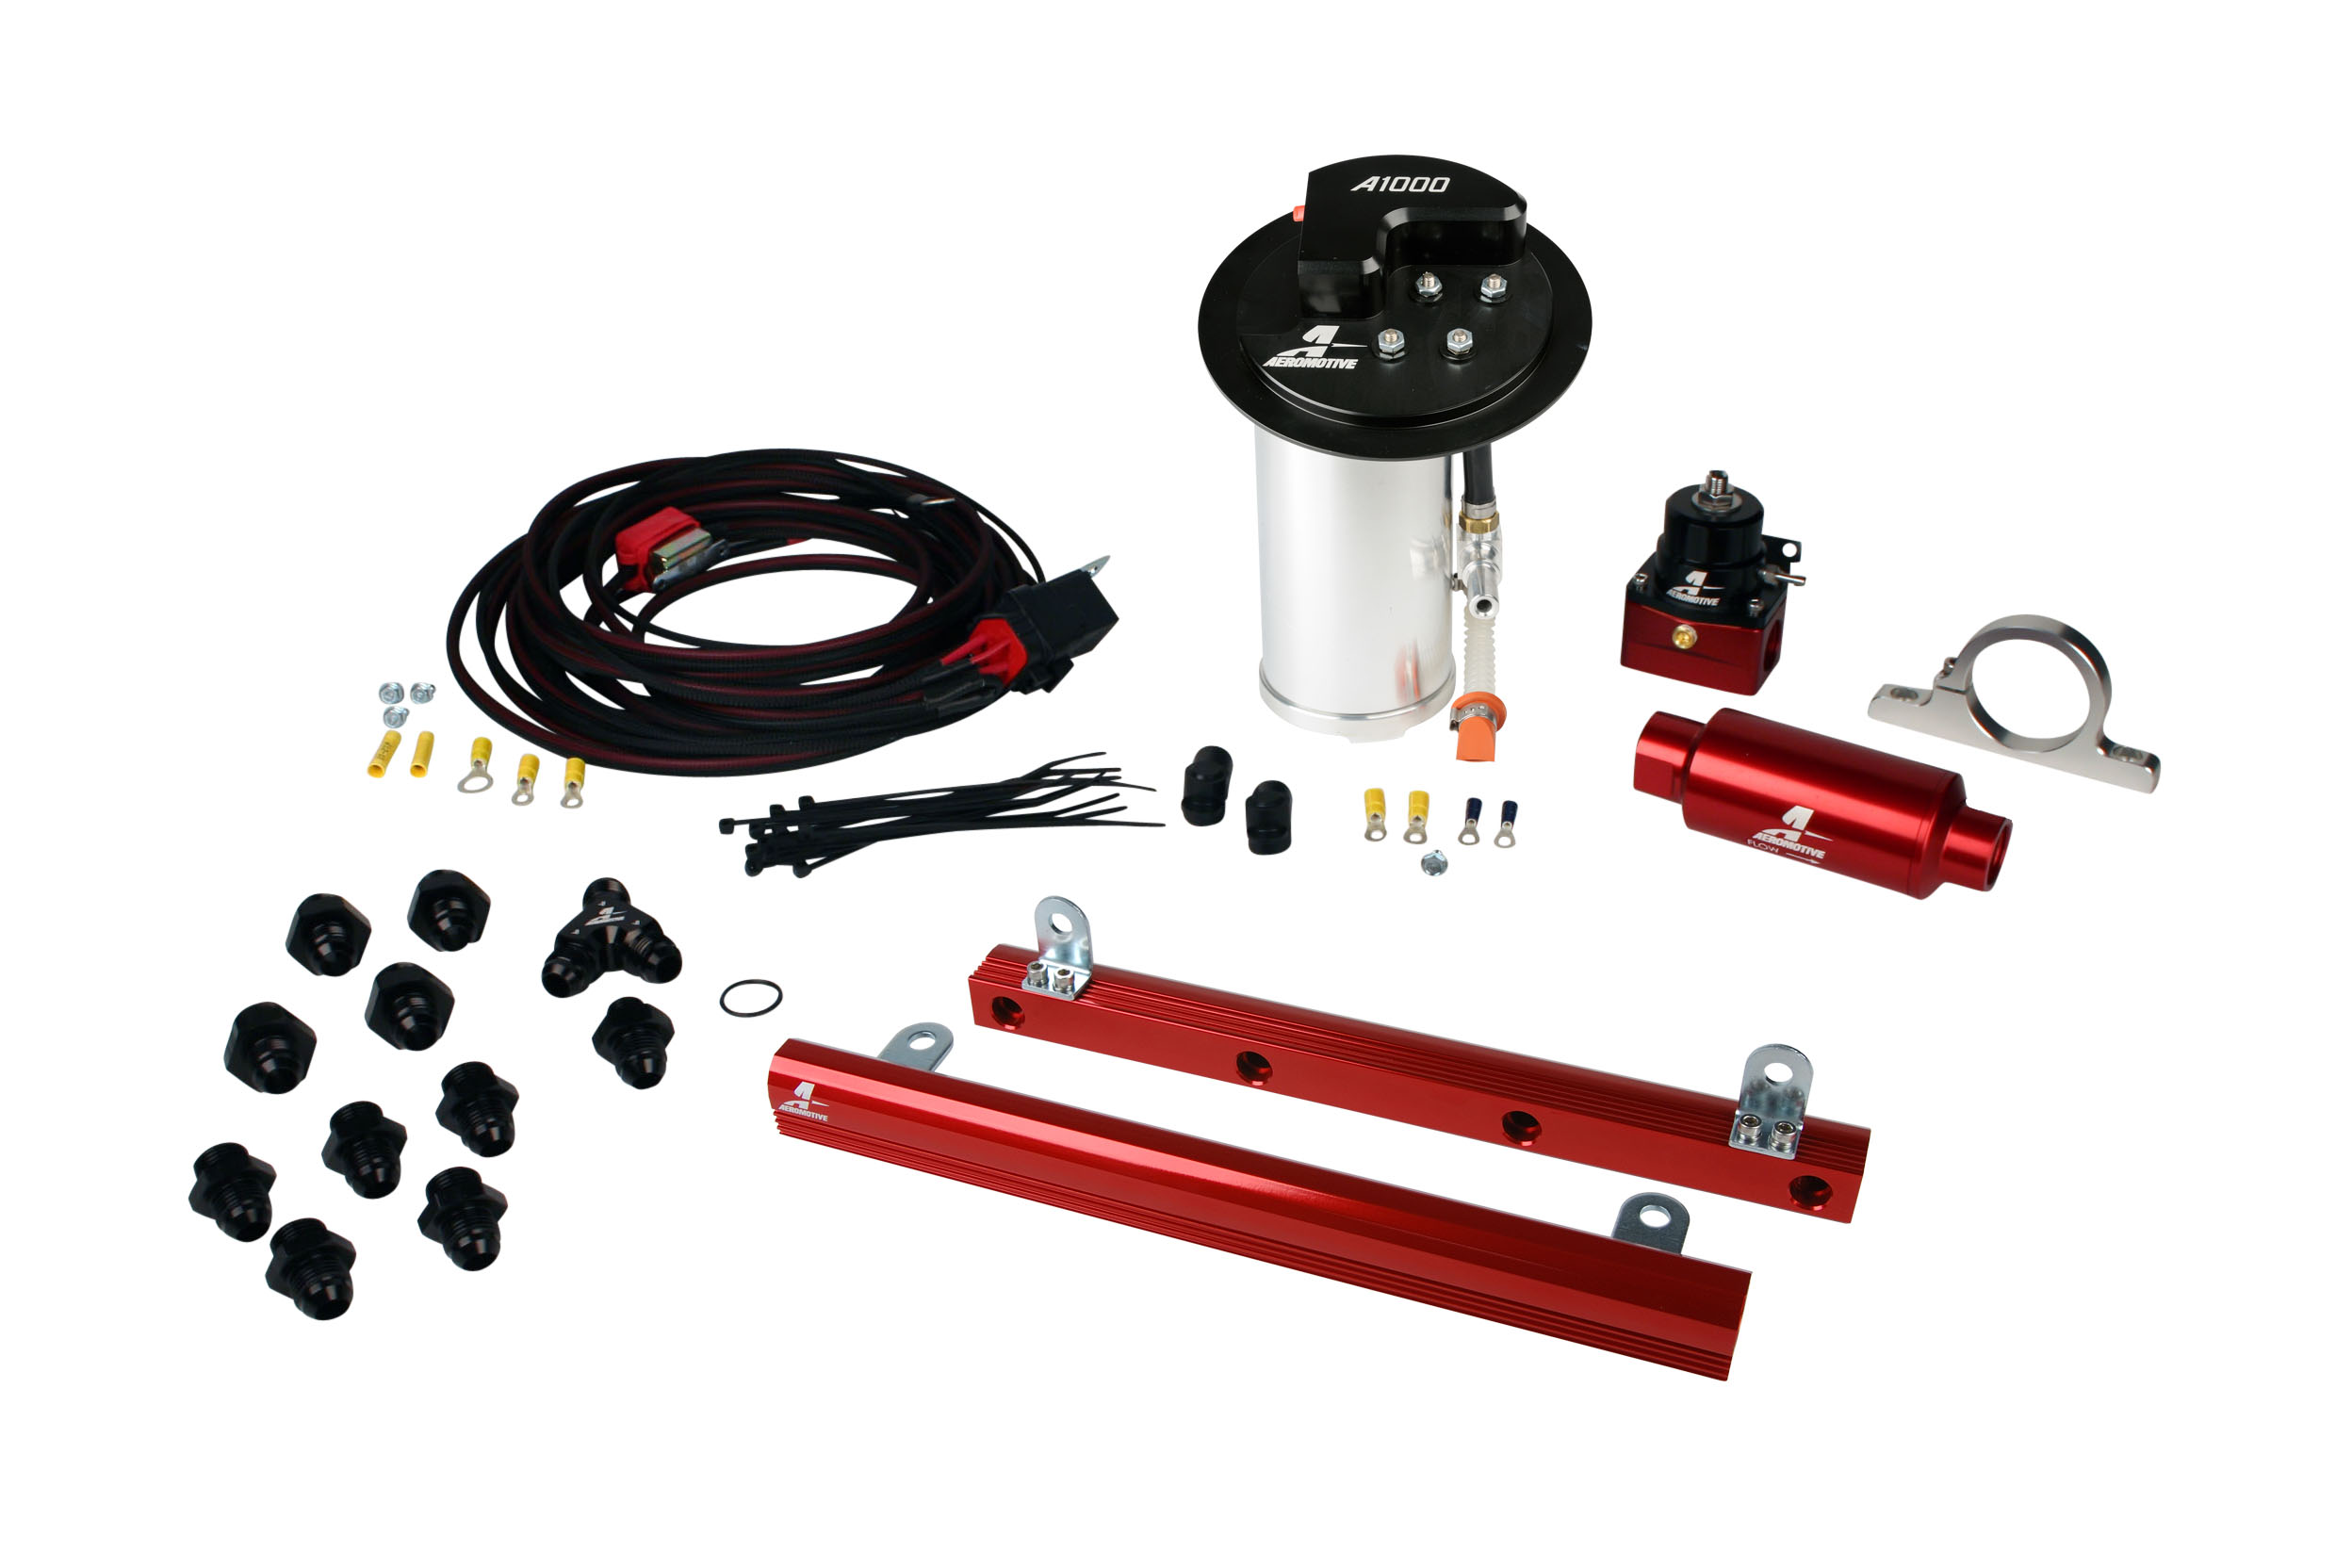 2010-2017 Ford Mustang GT Aeromotive Stealth A1000 Race Fuel System w/5.4L GT500 4 Valve Fuel Rail